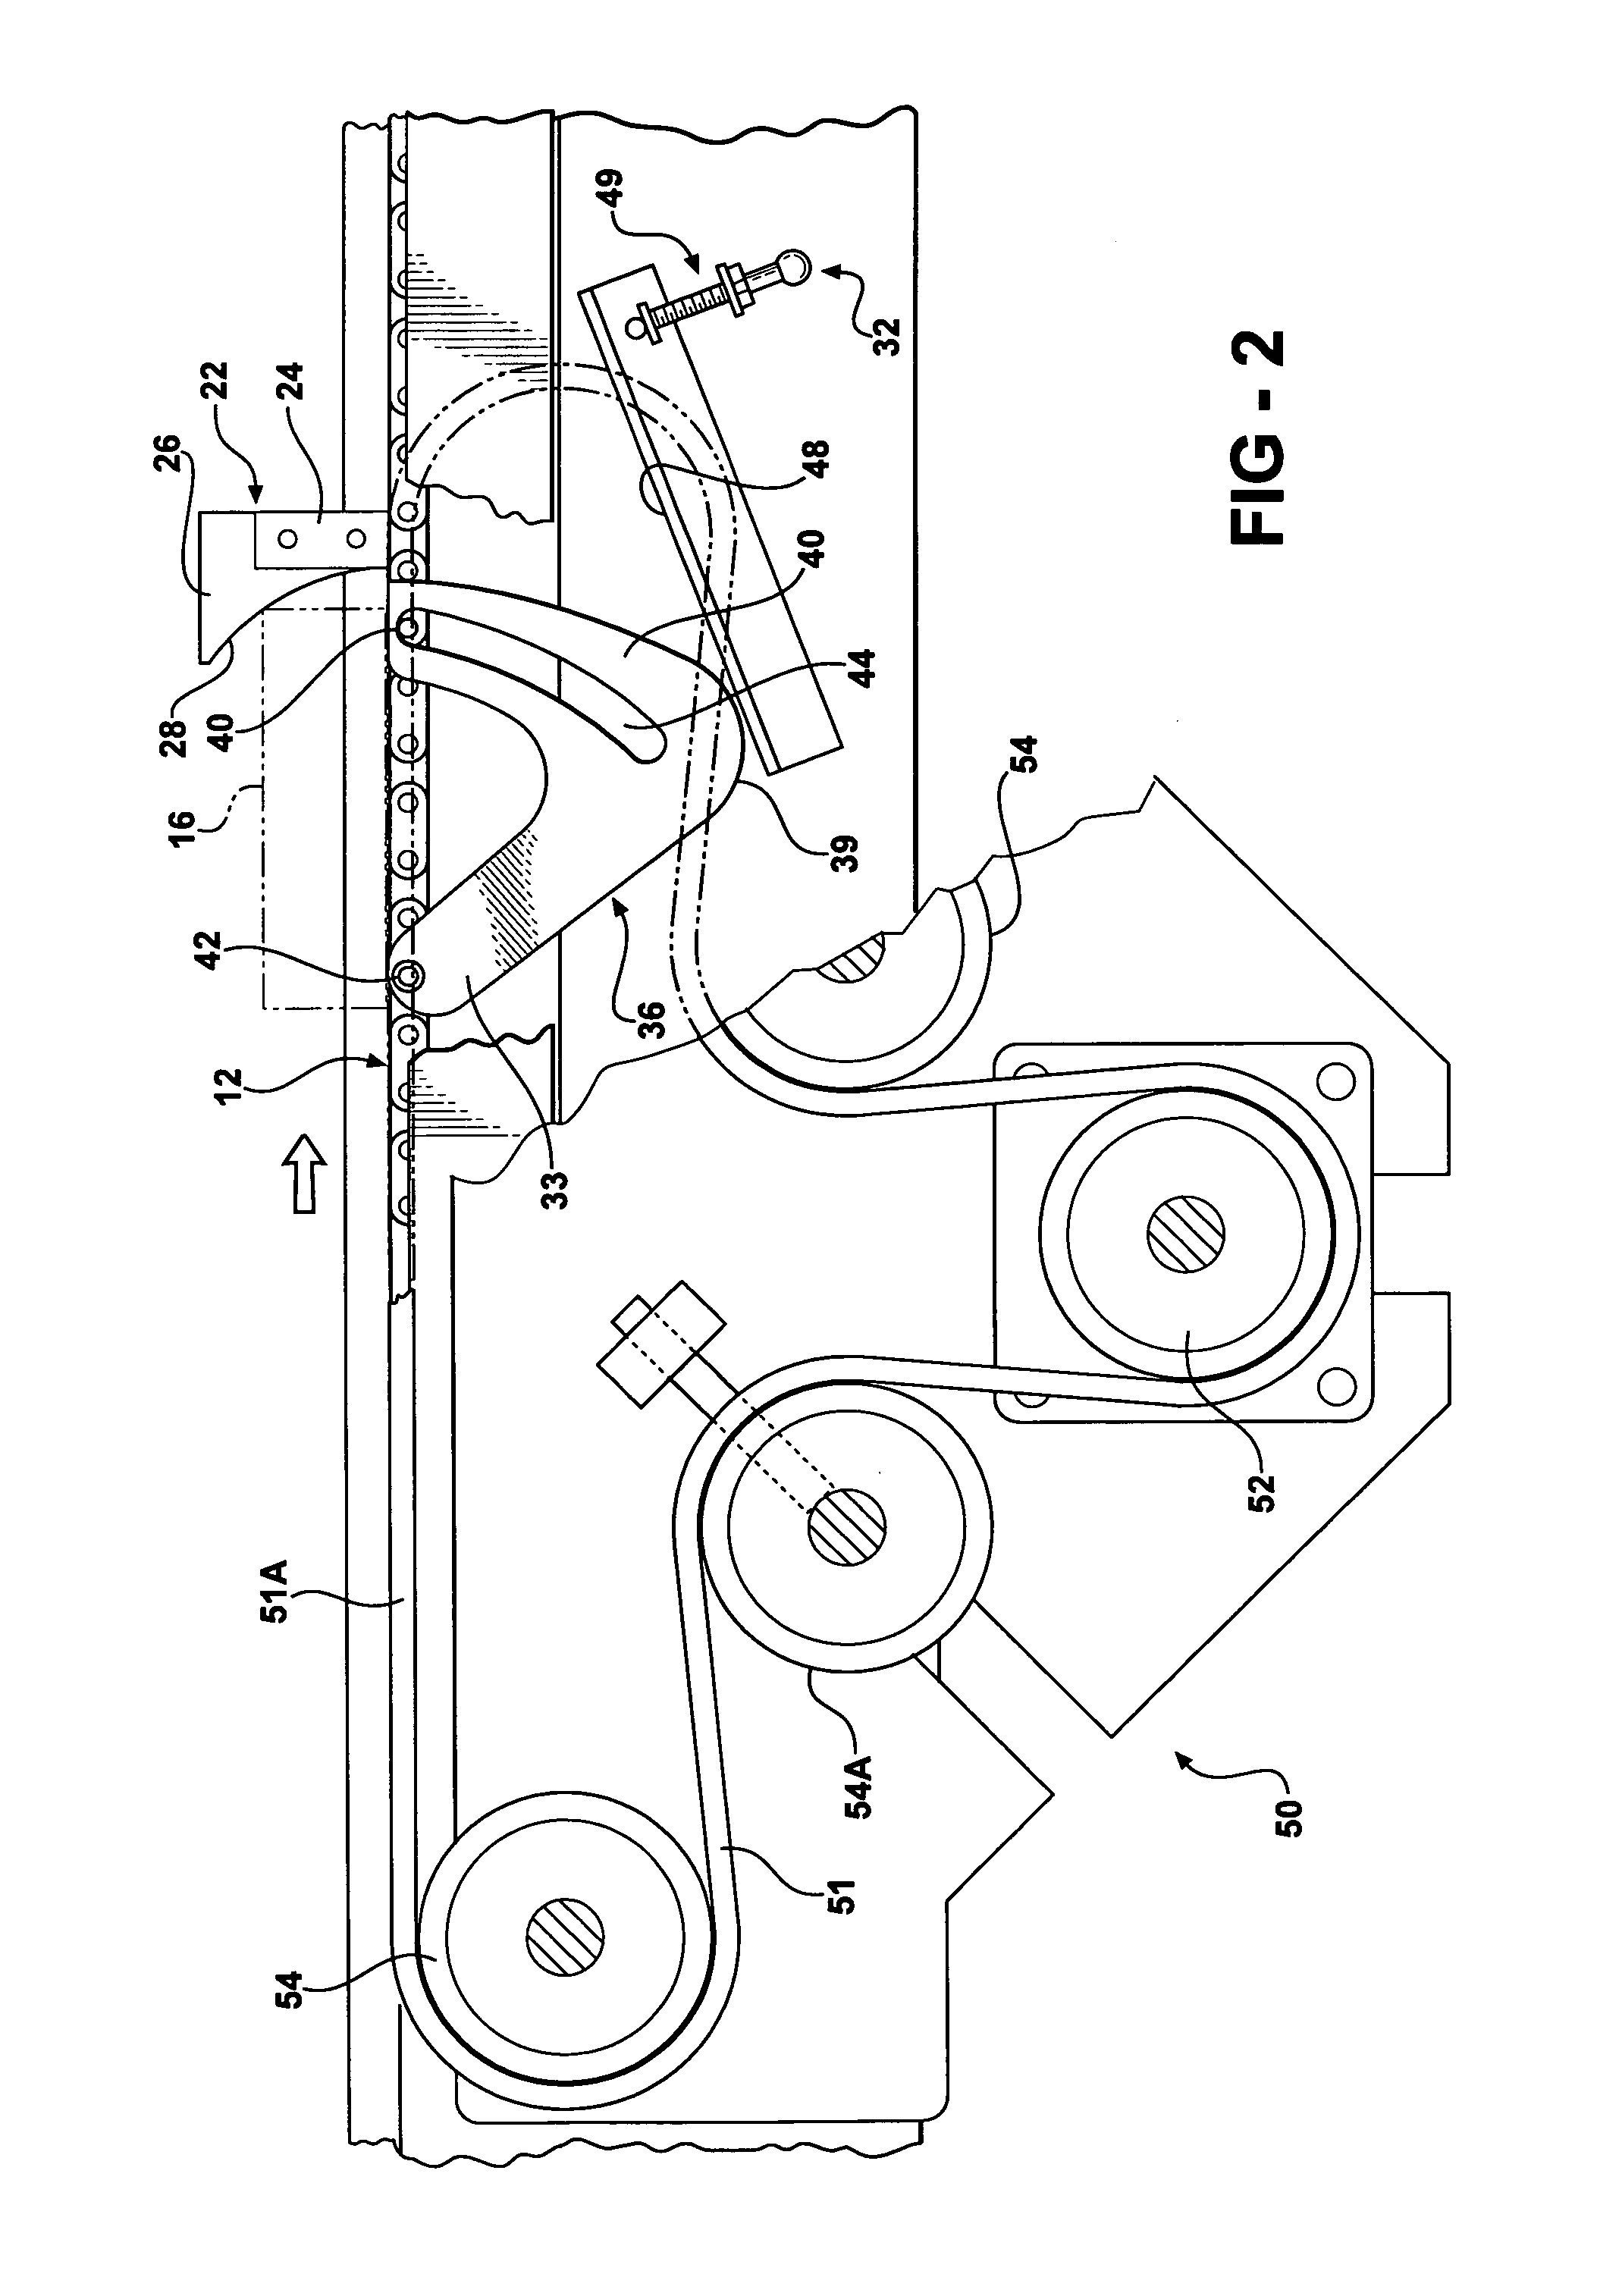 High speed turnover apparatus and method